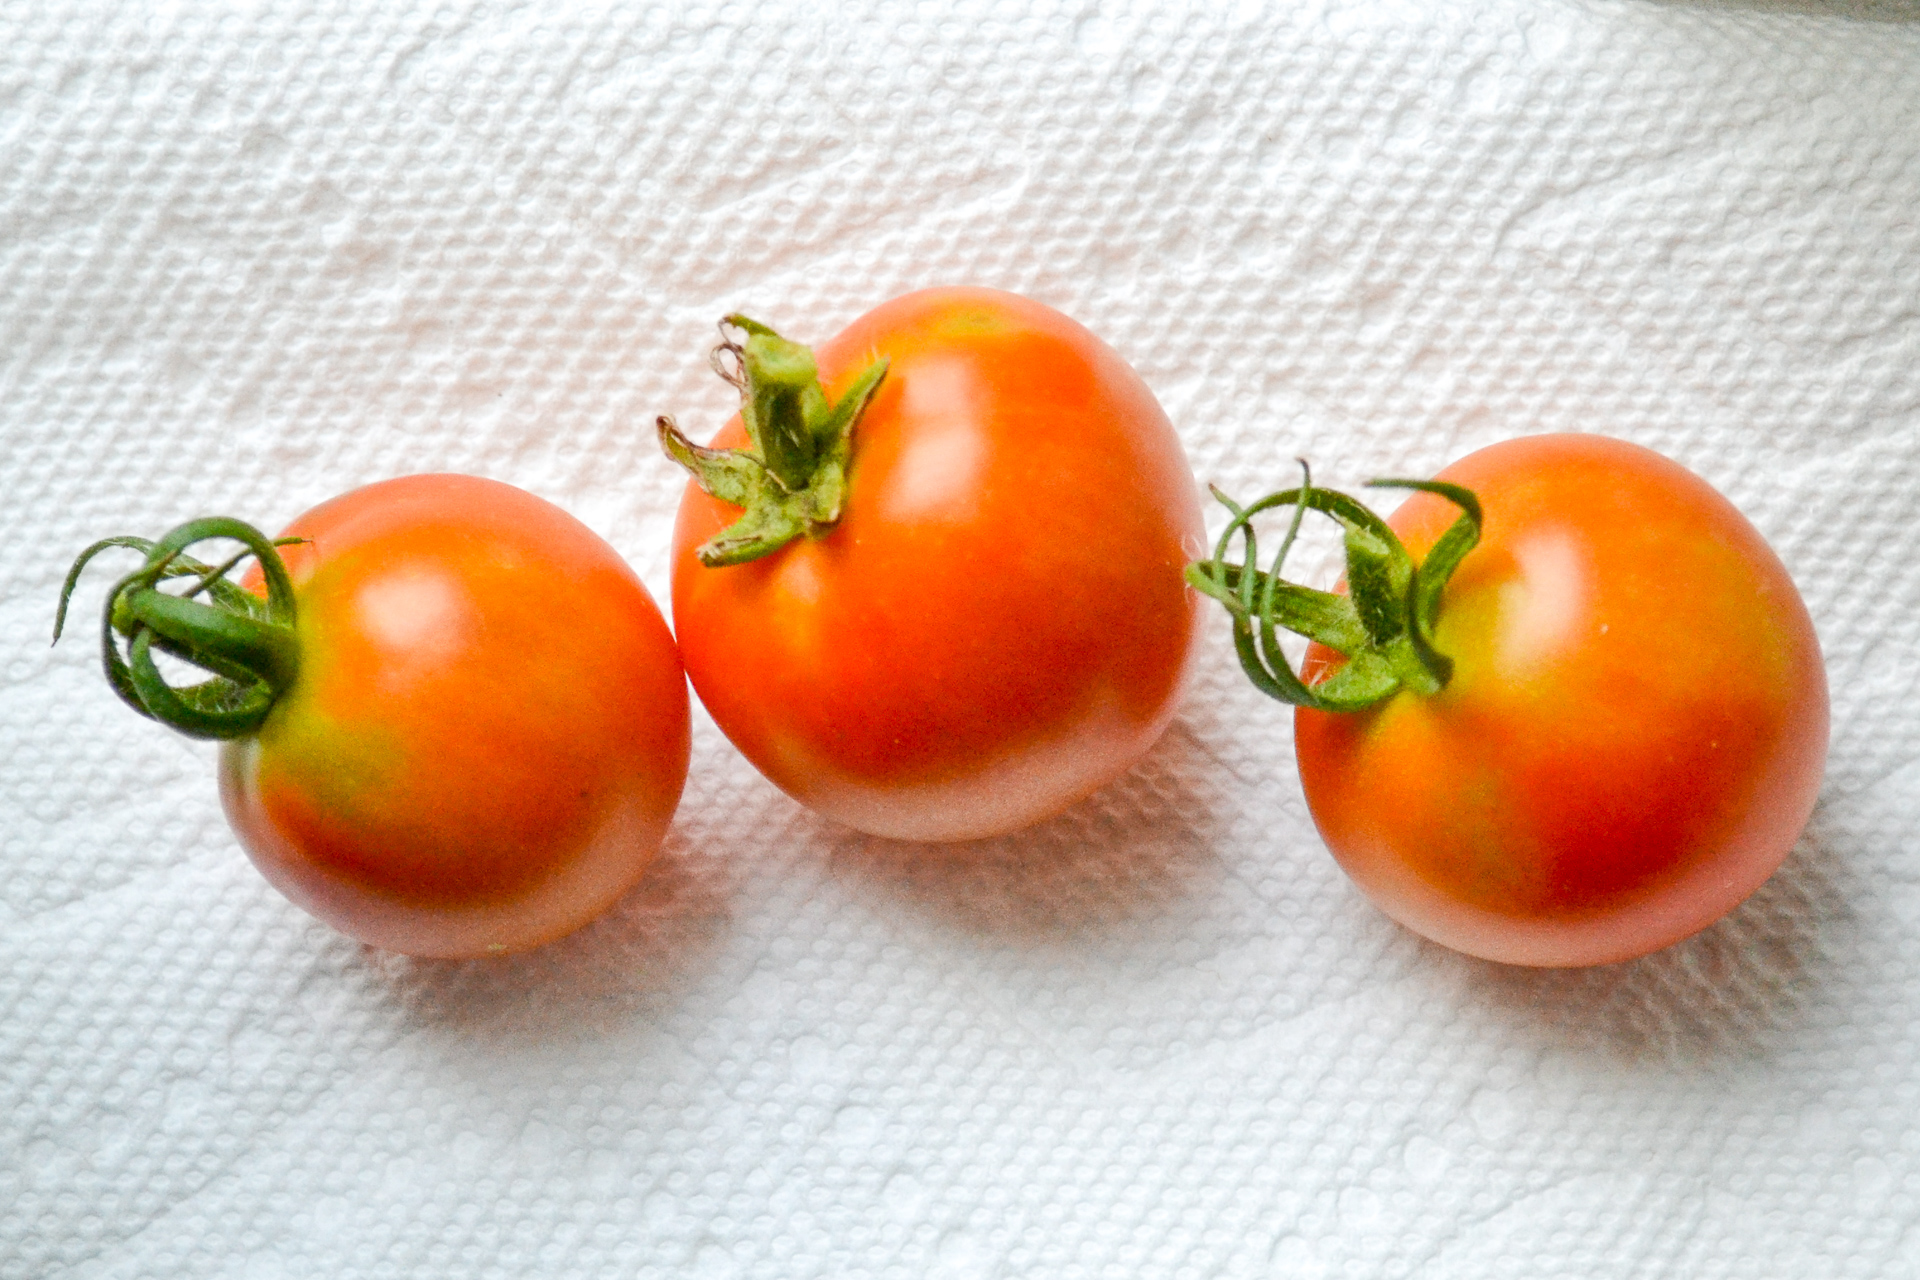 laying out tomatoes on windowsill to ripen